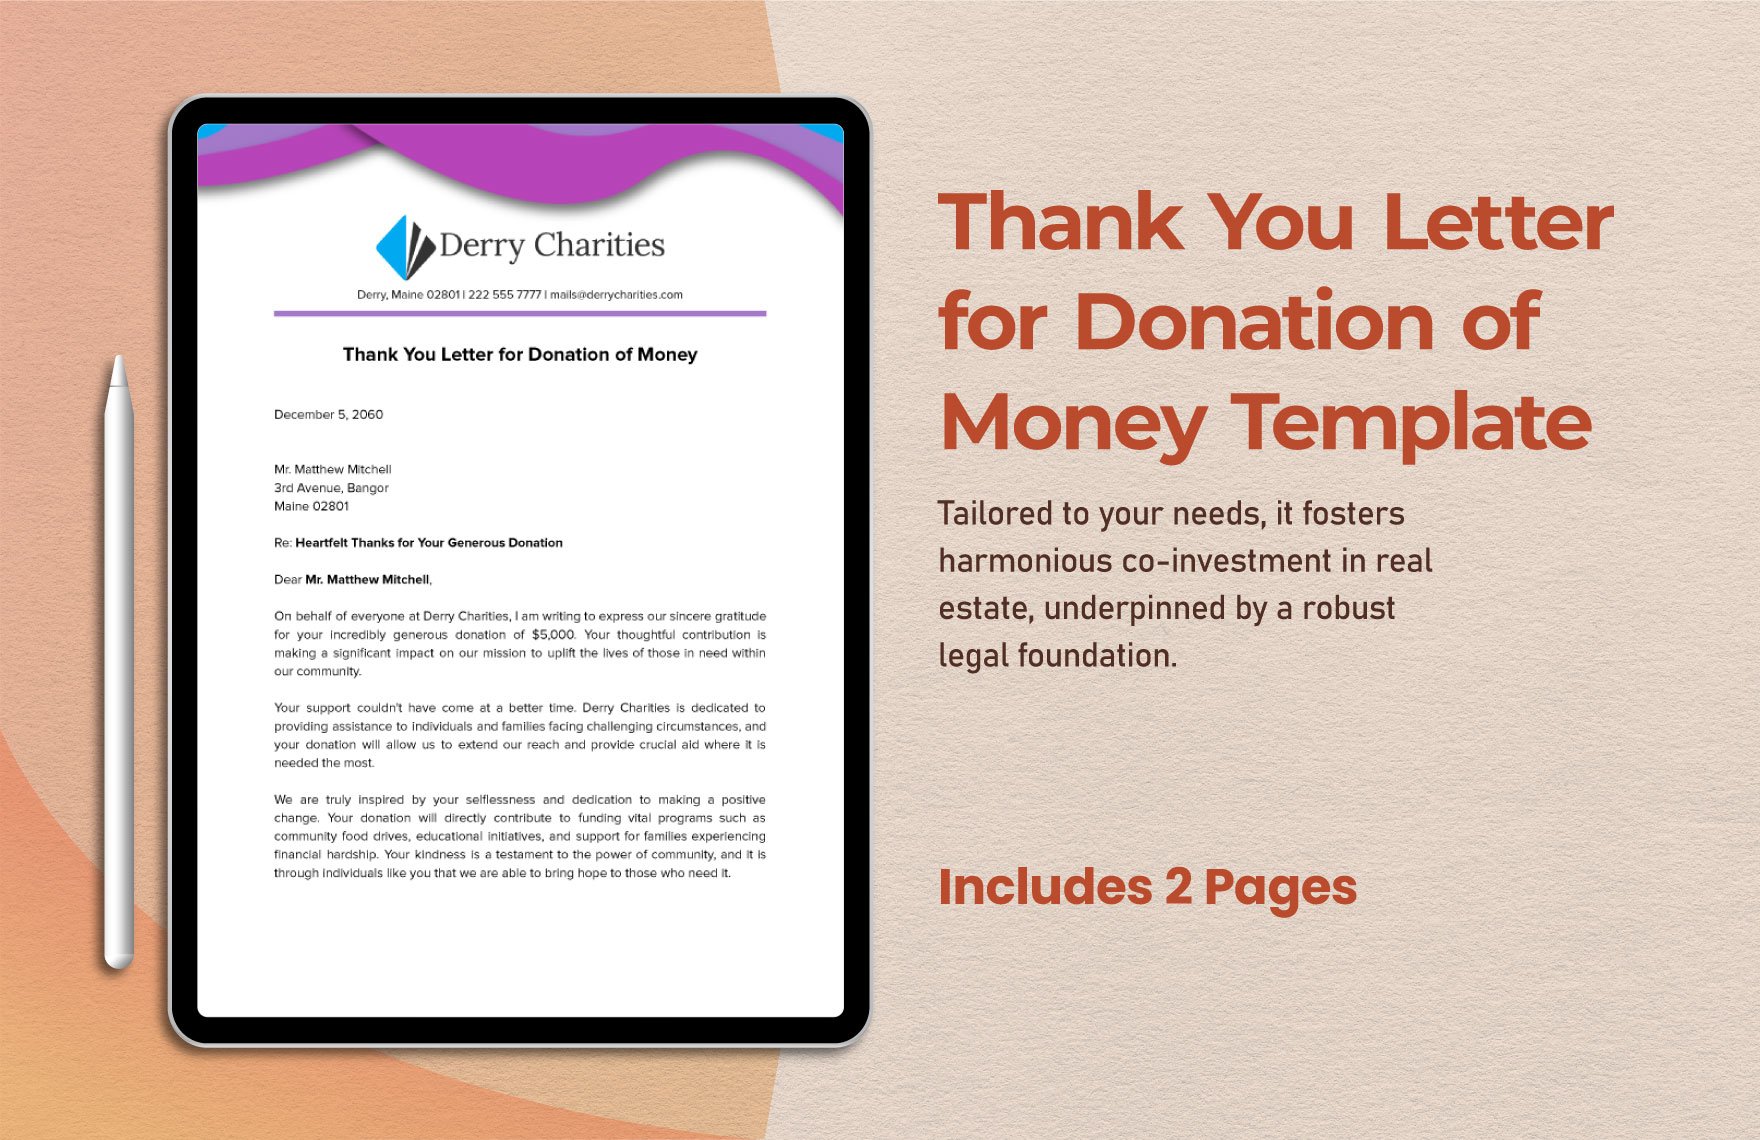 Thank You Letter for Donation of Money Template